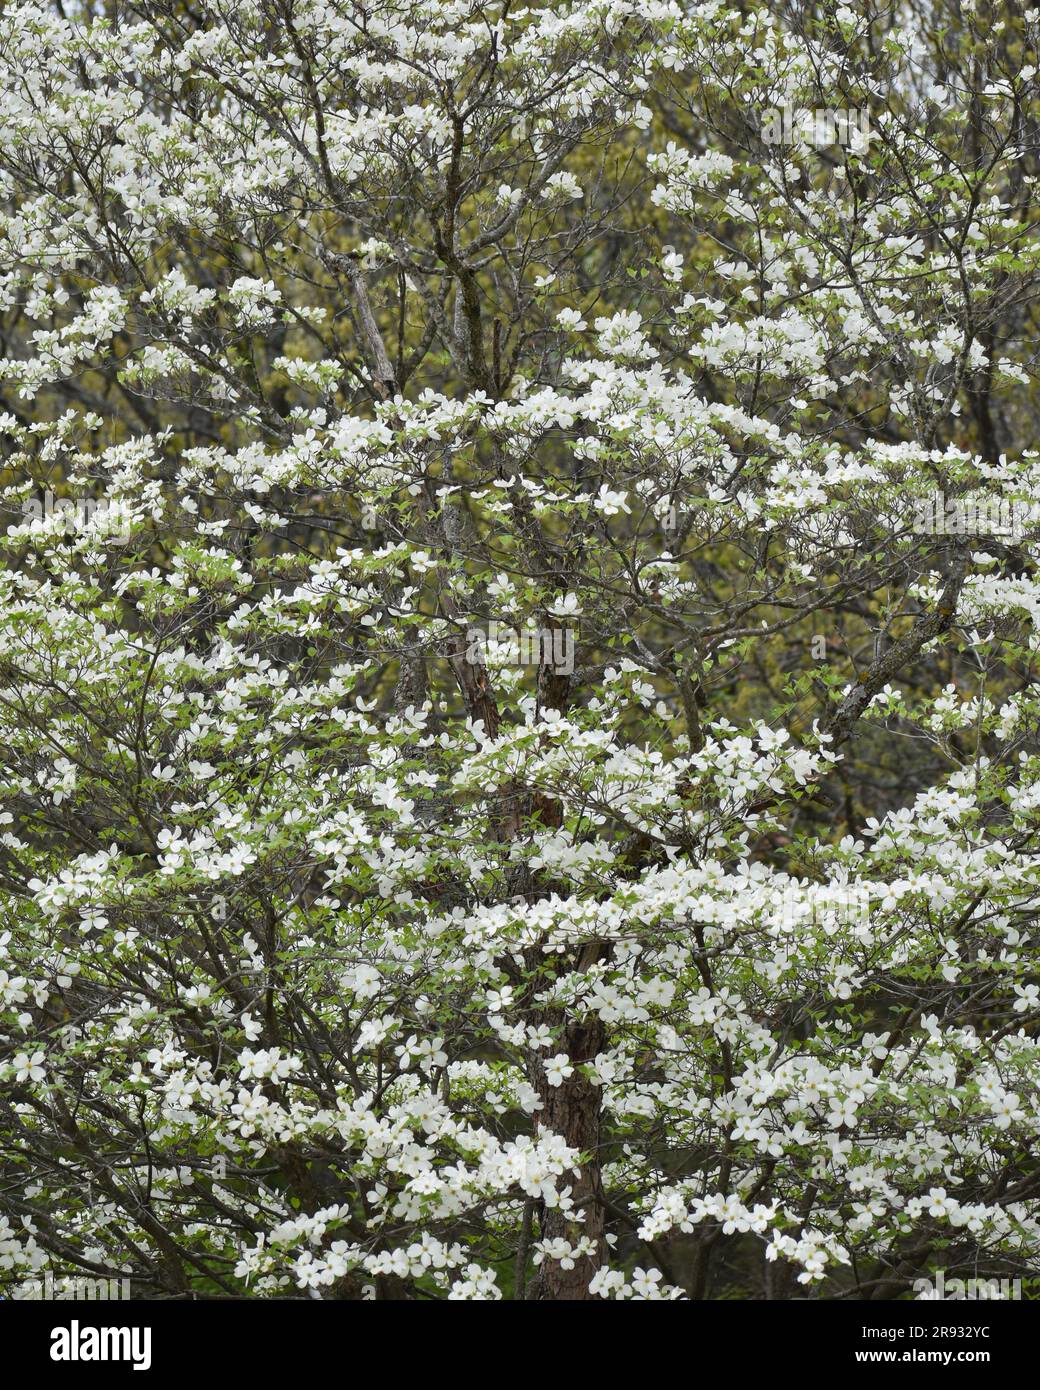 Flowering Dogwood, Cornus Florida, blooms in a showy display in early spring. Often associated with Easter due to the cross shaped flowers. Stock Photo